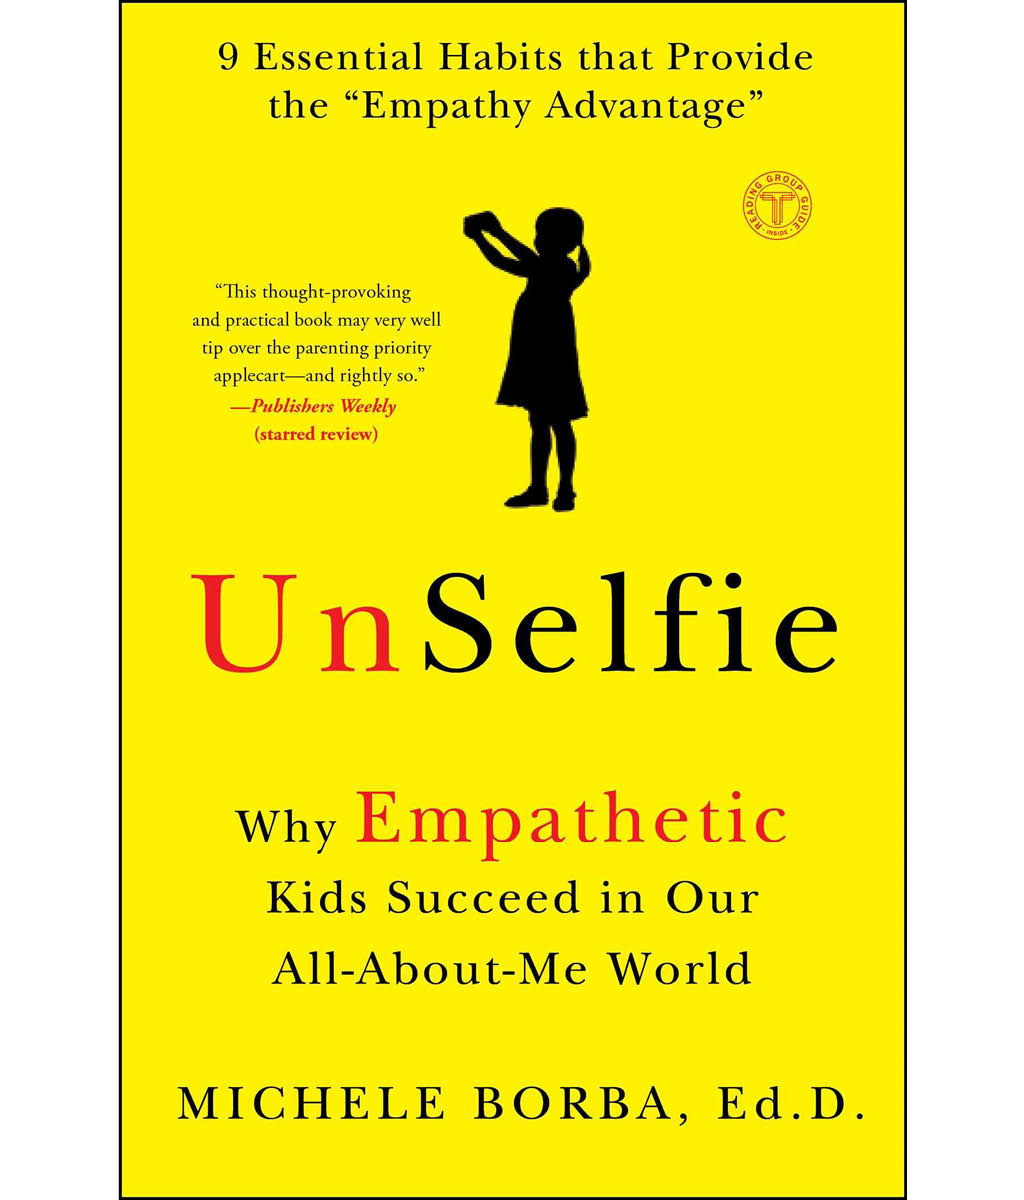 UnSelfie: Why Empathetic Kids Succeed in Our All-About-Me World by Borba Dr., Michele